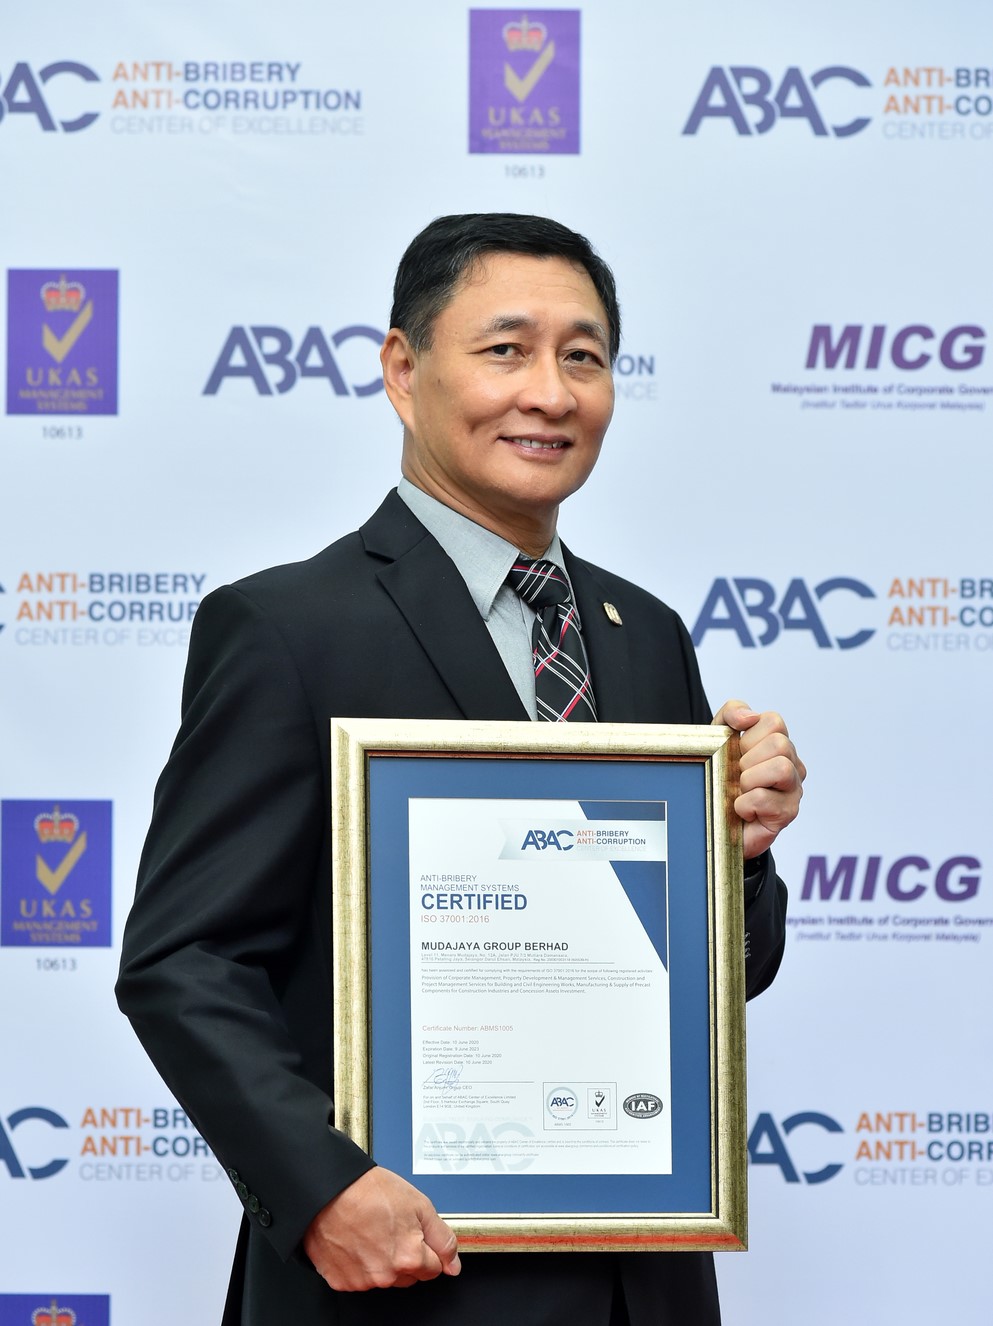 Malaysia’s Mudajaya Group certified for ISO 37001 Anti-Bribery Management System by ABAC Center of Excellence